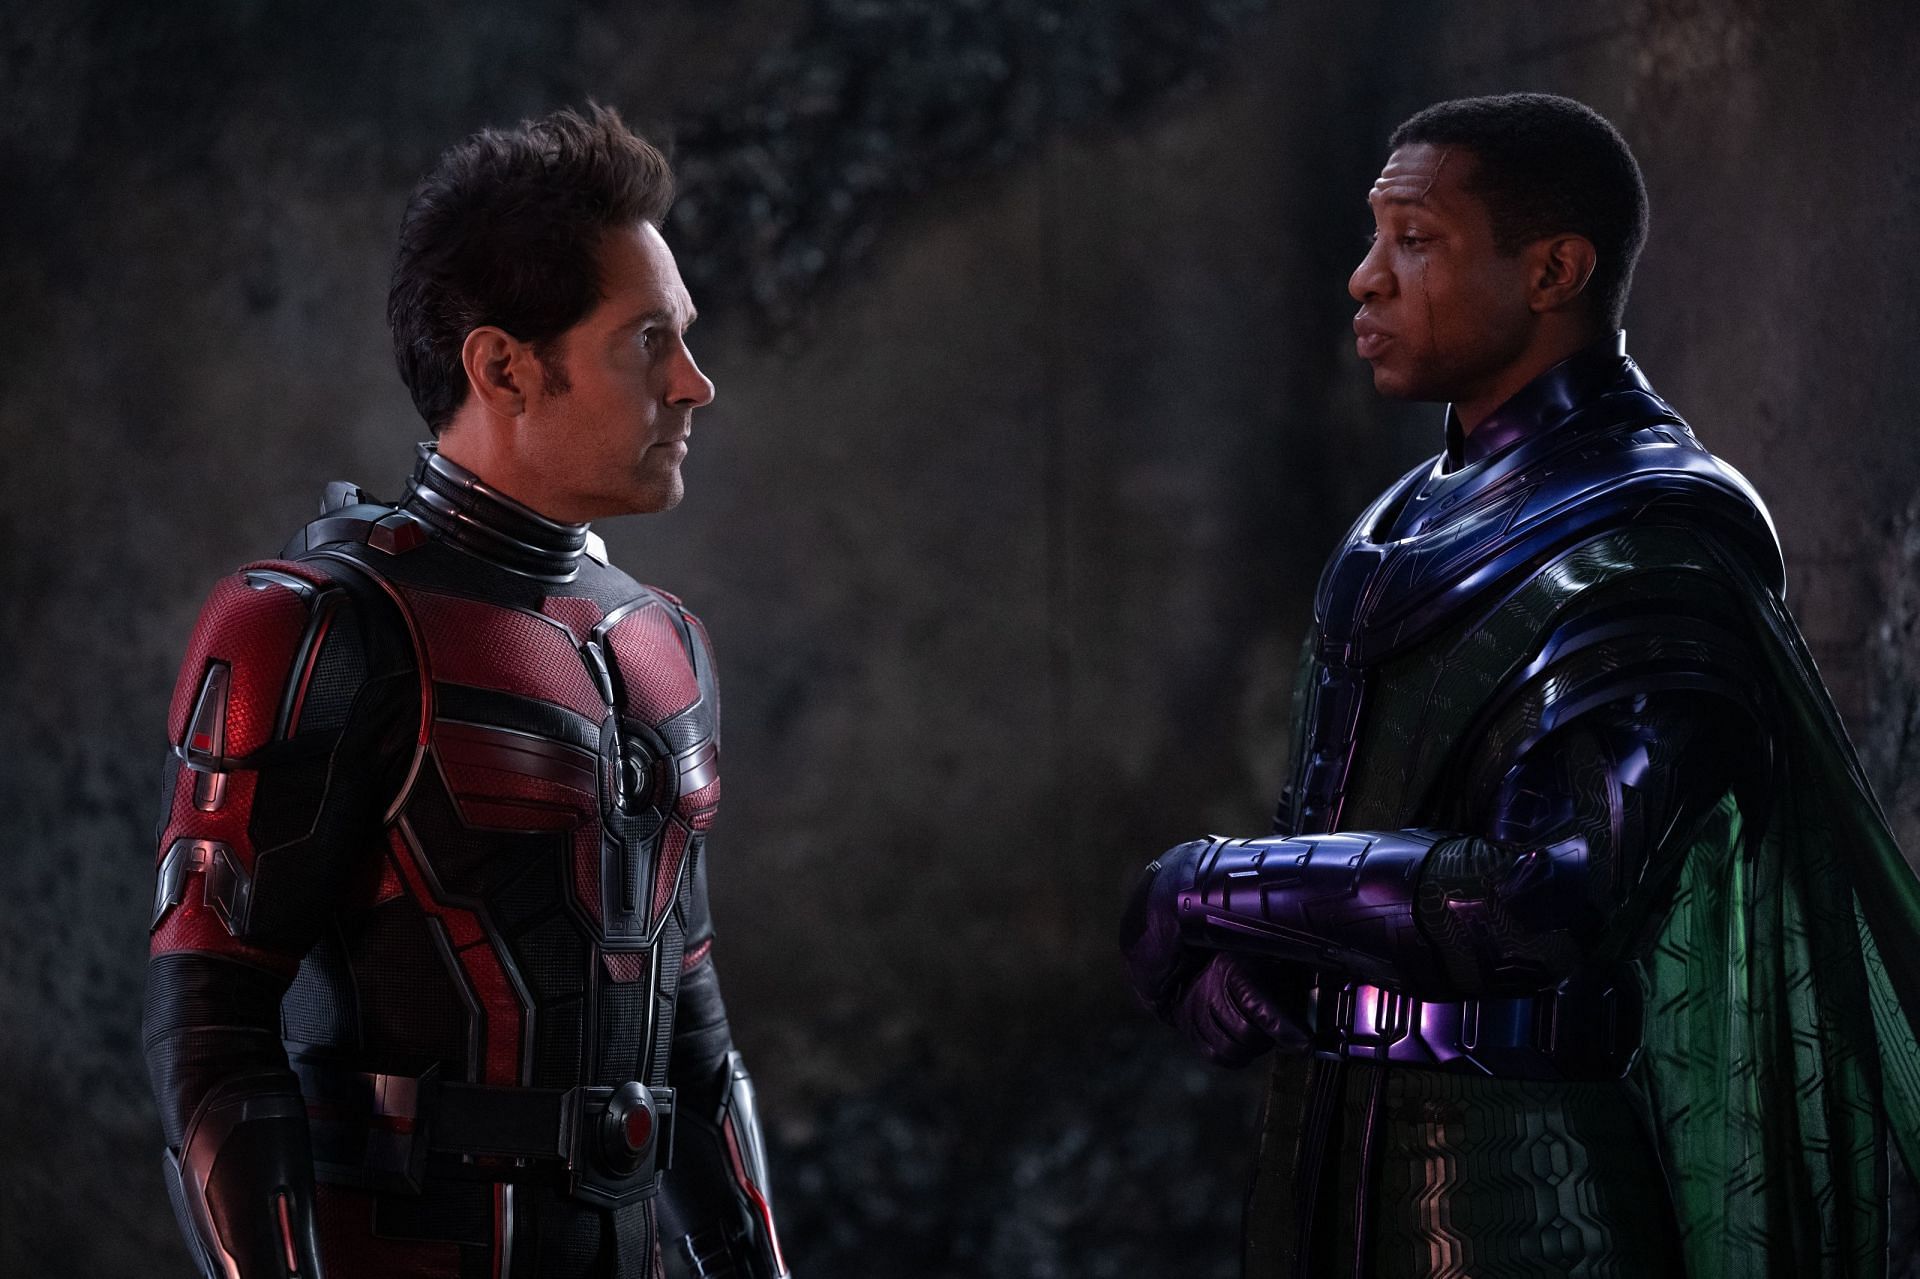 Scott Lang and Hope van Dyne: Trapped in the Quantum Realm and facing off against Kang the Conqueror in Ant-Man 3: Quantumania (Image via Marvel Studios)